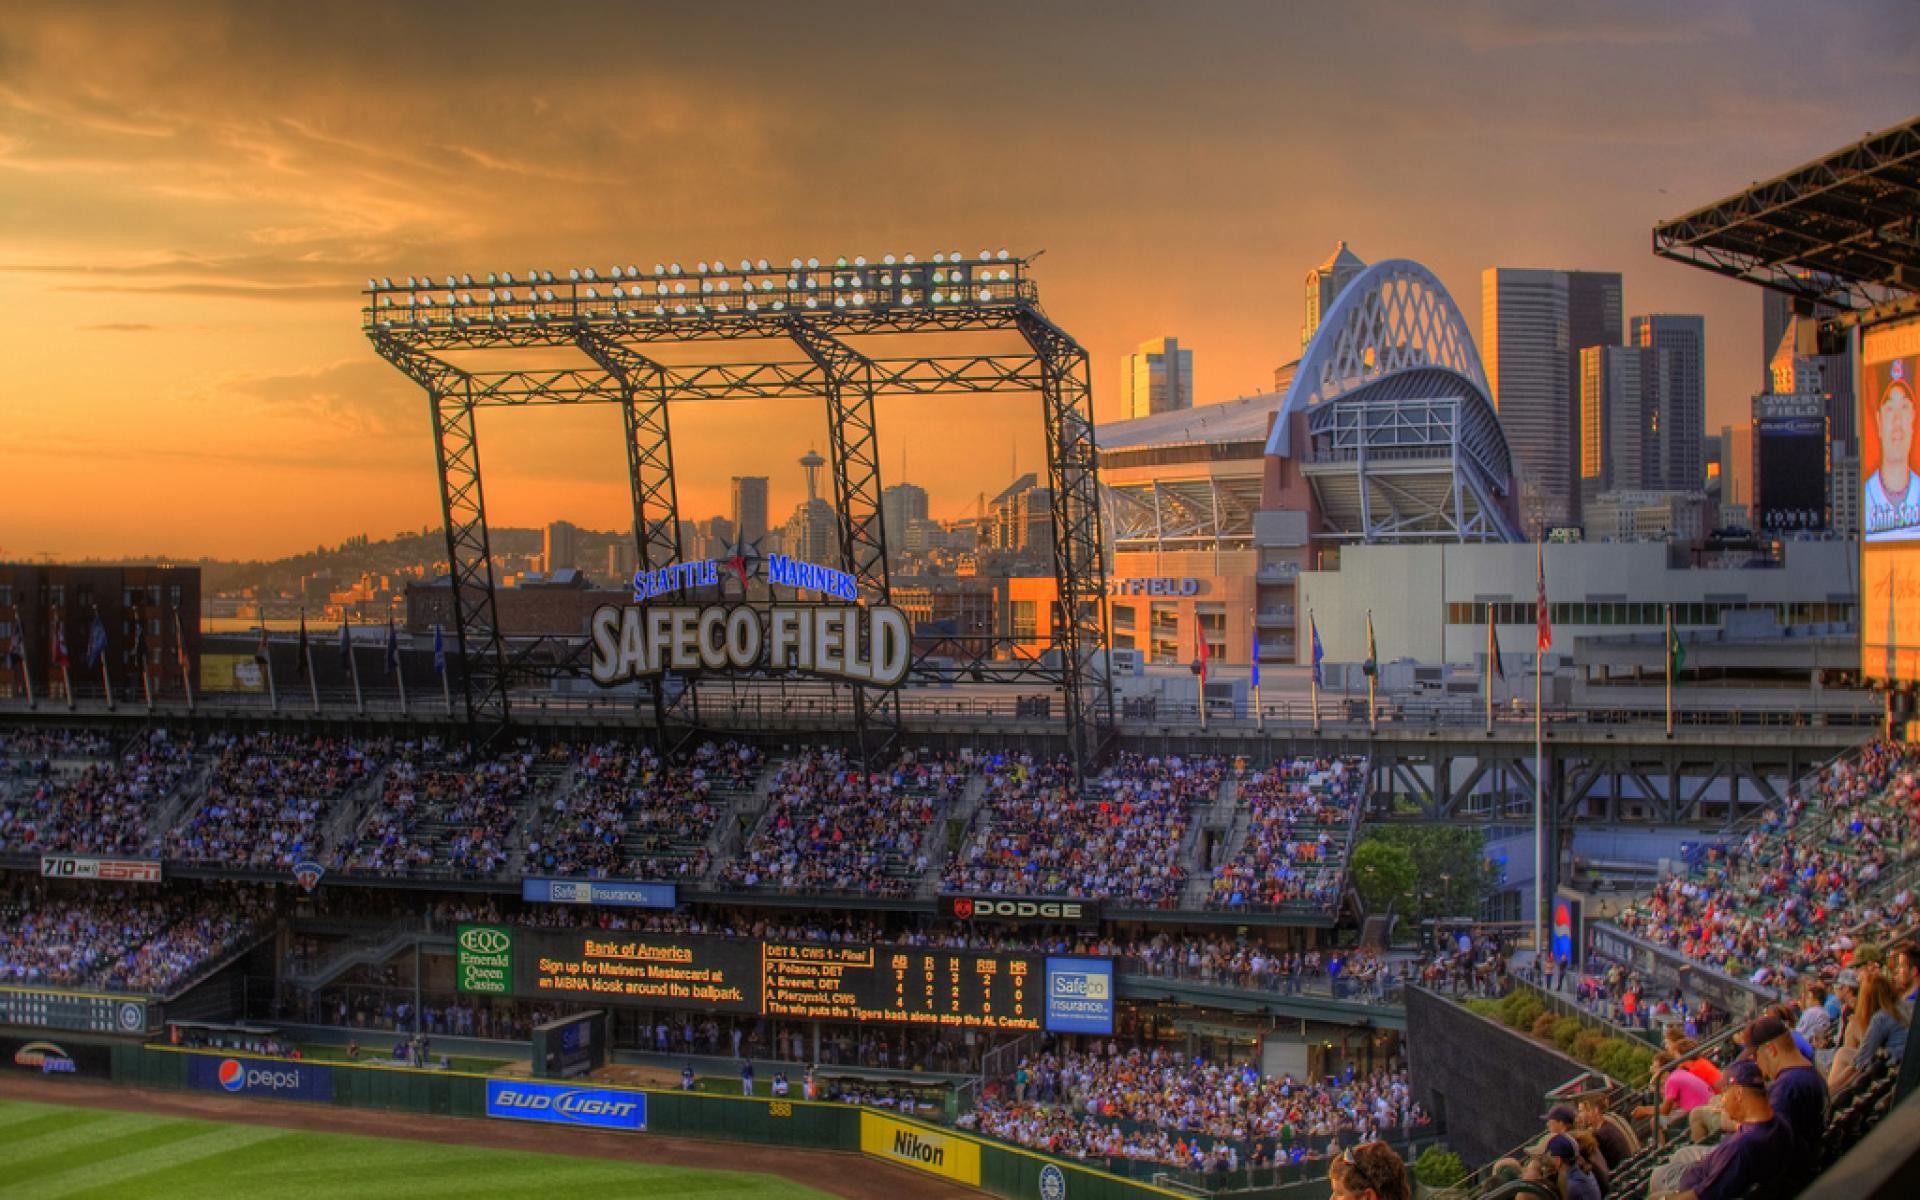 1920x1200 Additionally available resolutions jpg  Safeco wallpaper